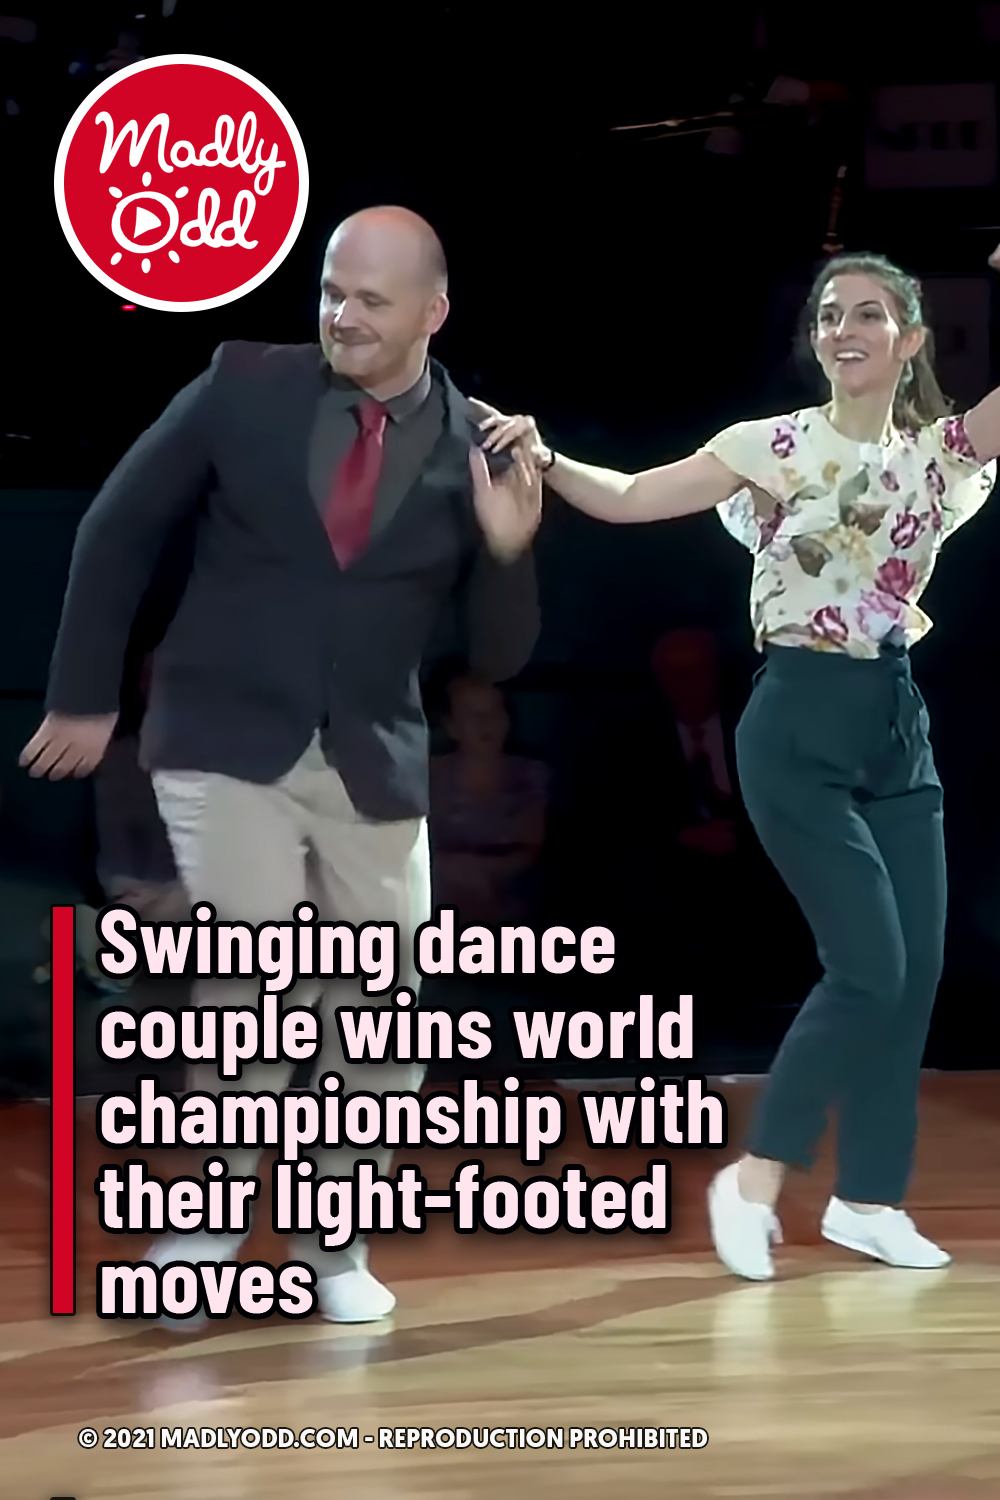 Swinging dance couple wins world championship with their light-footed moves